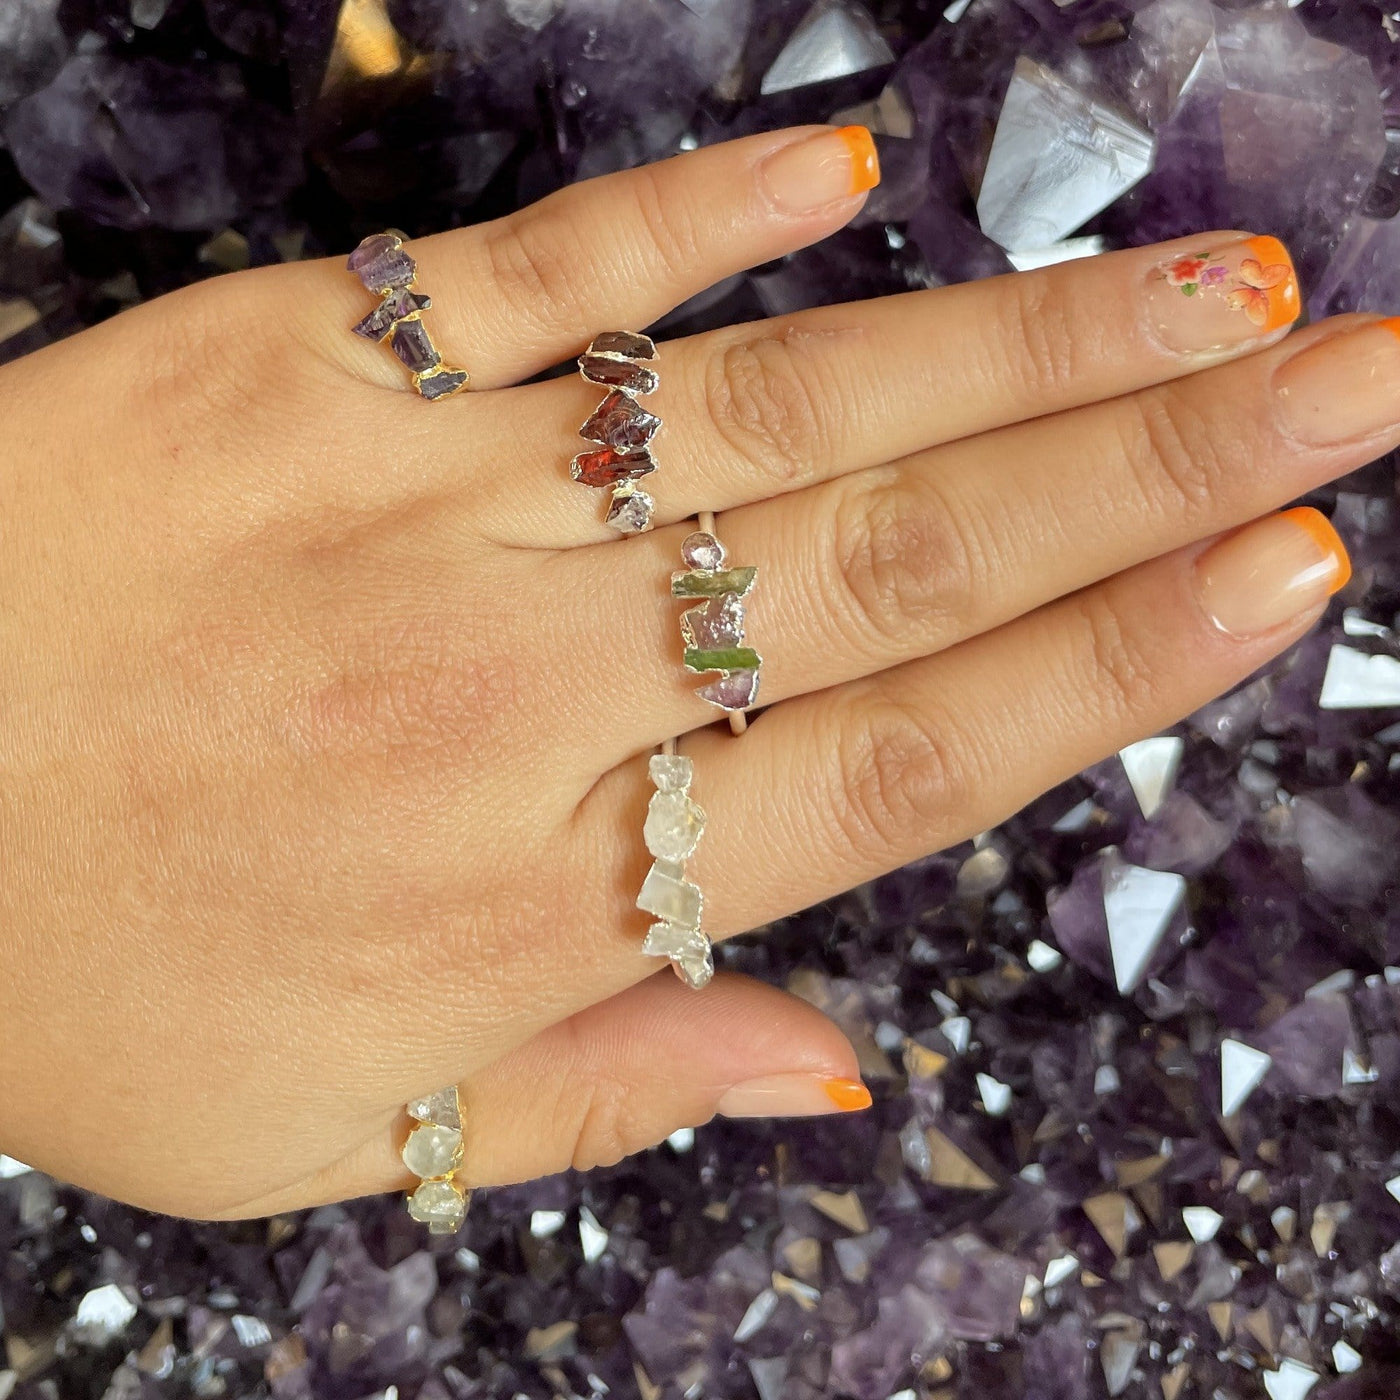 Hand wearing 5 Raw Stone Rings with amethyst background